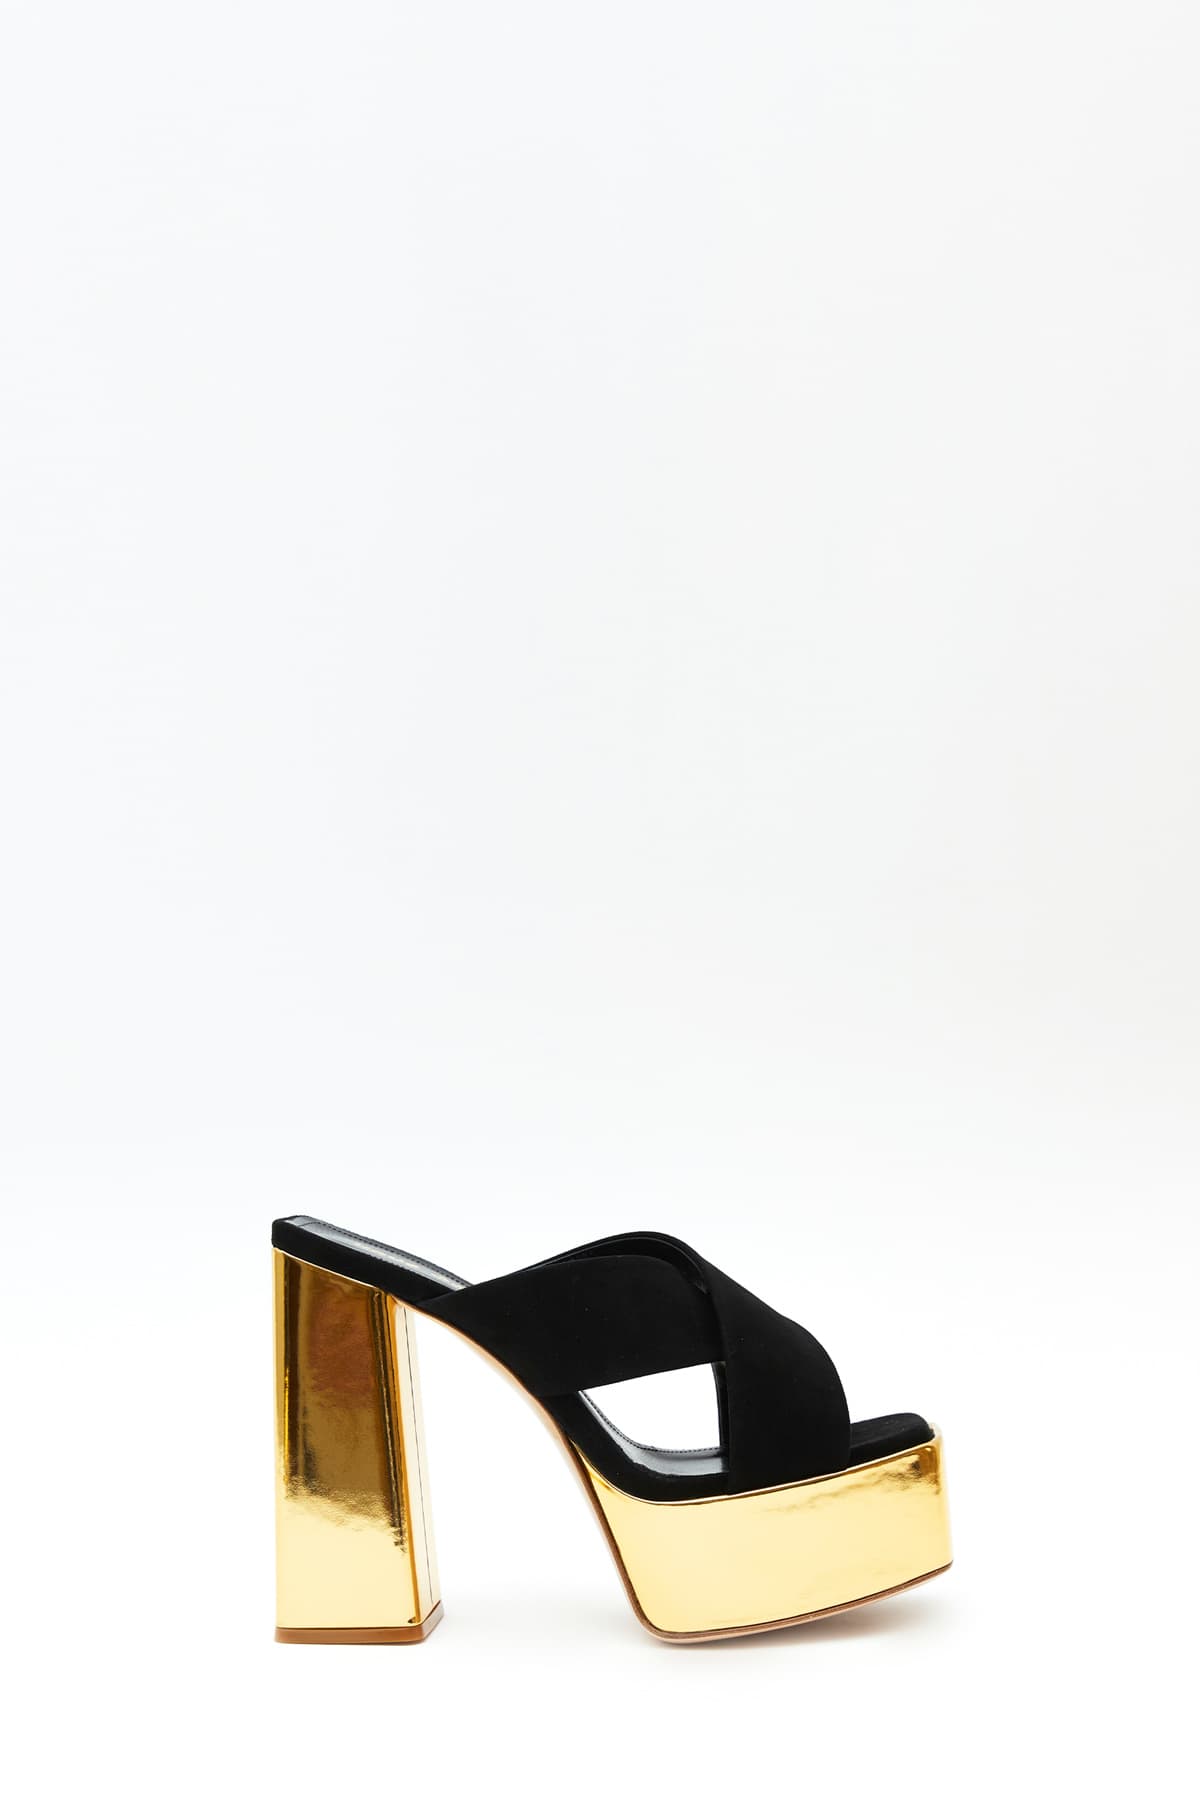 Sideview of The Wannabe mule in metal gold and black from the Haus of Honey fall-winter 2023-24